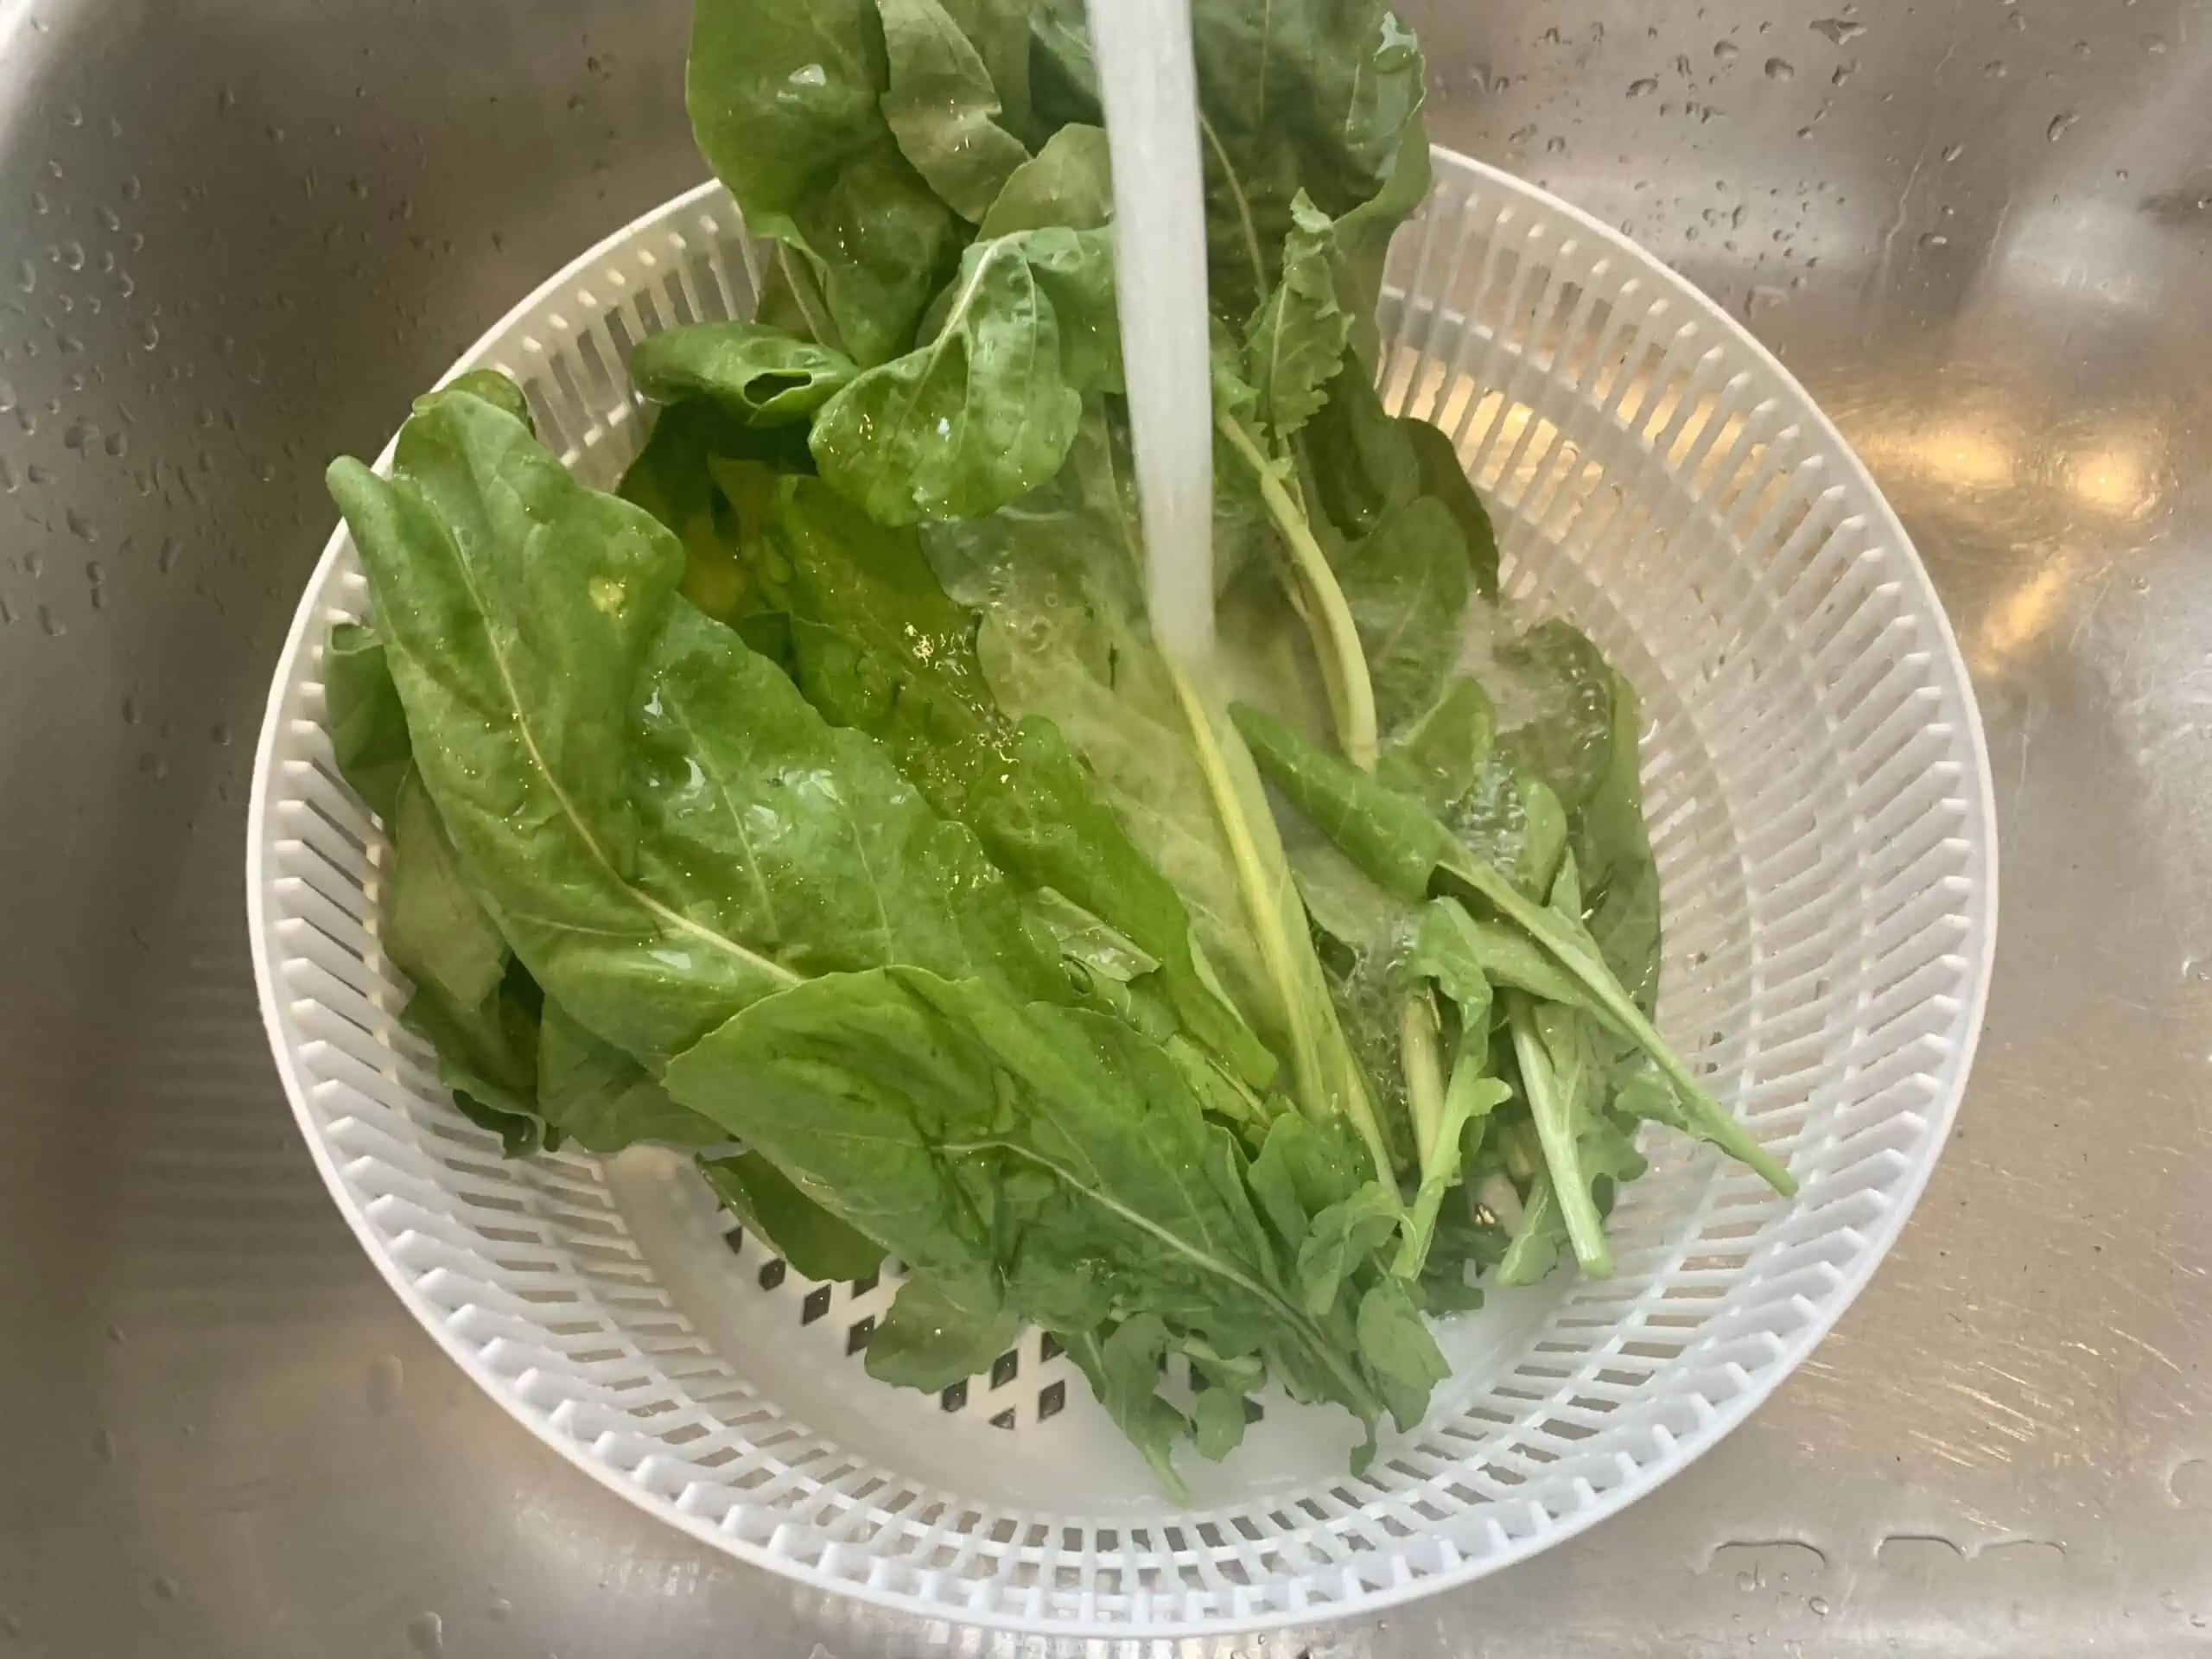 Washing a bunch of rocket in a colander in the sink under cold running water.